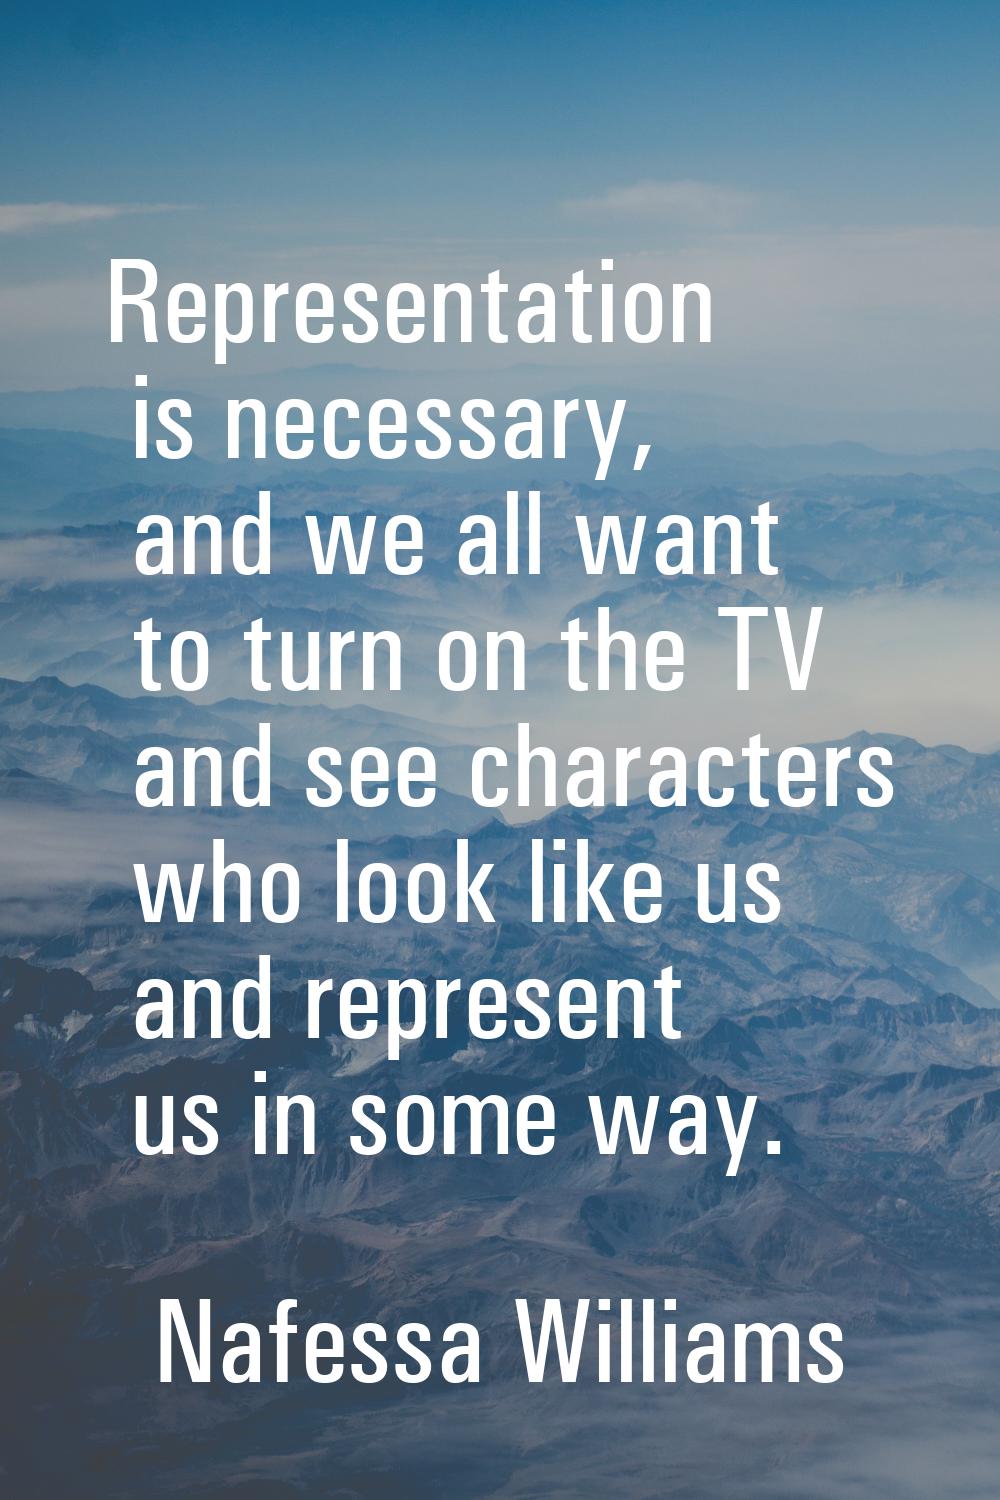 Representation is necessary, and we all want to turn on the TV and see characters who look like us 